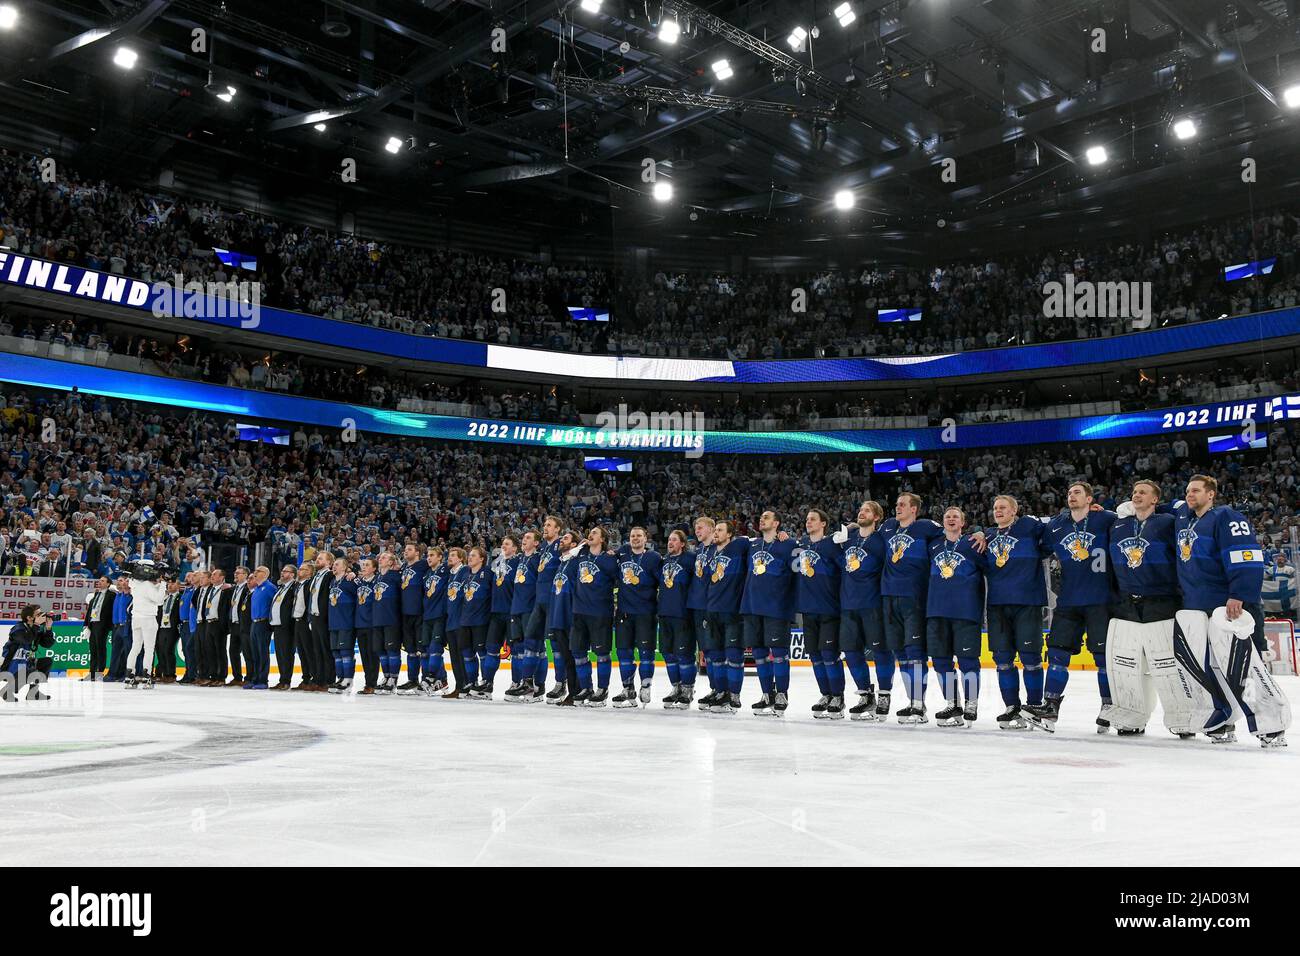 29.05.2022, Tampere, Nokia Arena, Finland v Canada - 2022 IIHF Ice Hockey  World Championship, Finland celebrate the victory (Photo by Andrea  Branca/Just Pictures/Sipa USA Stock Photo - Alamy